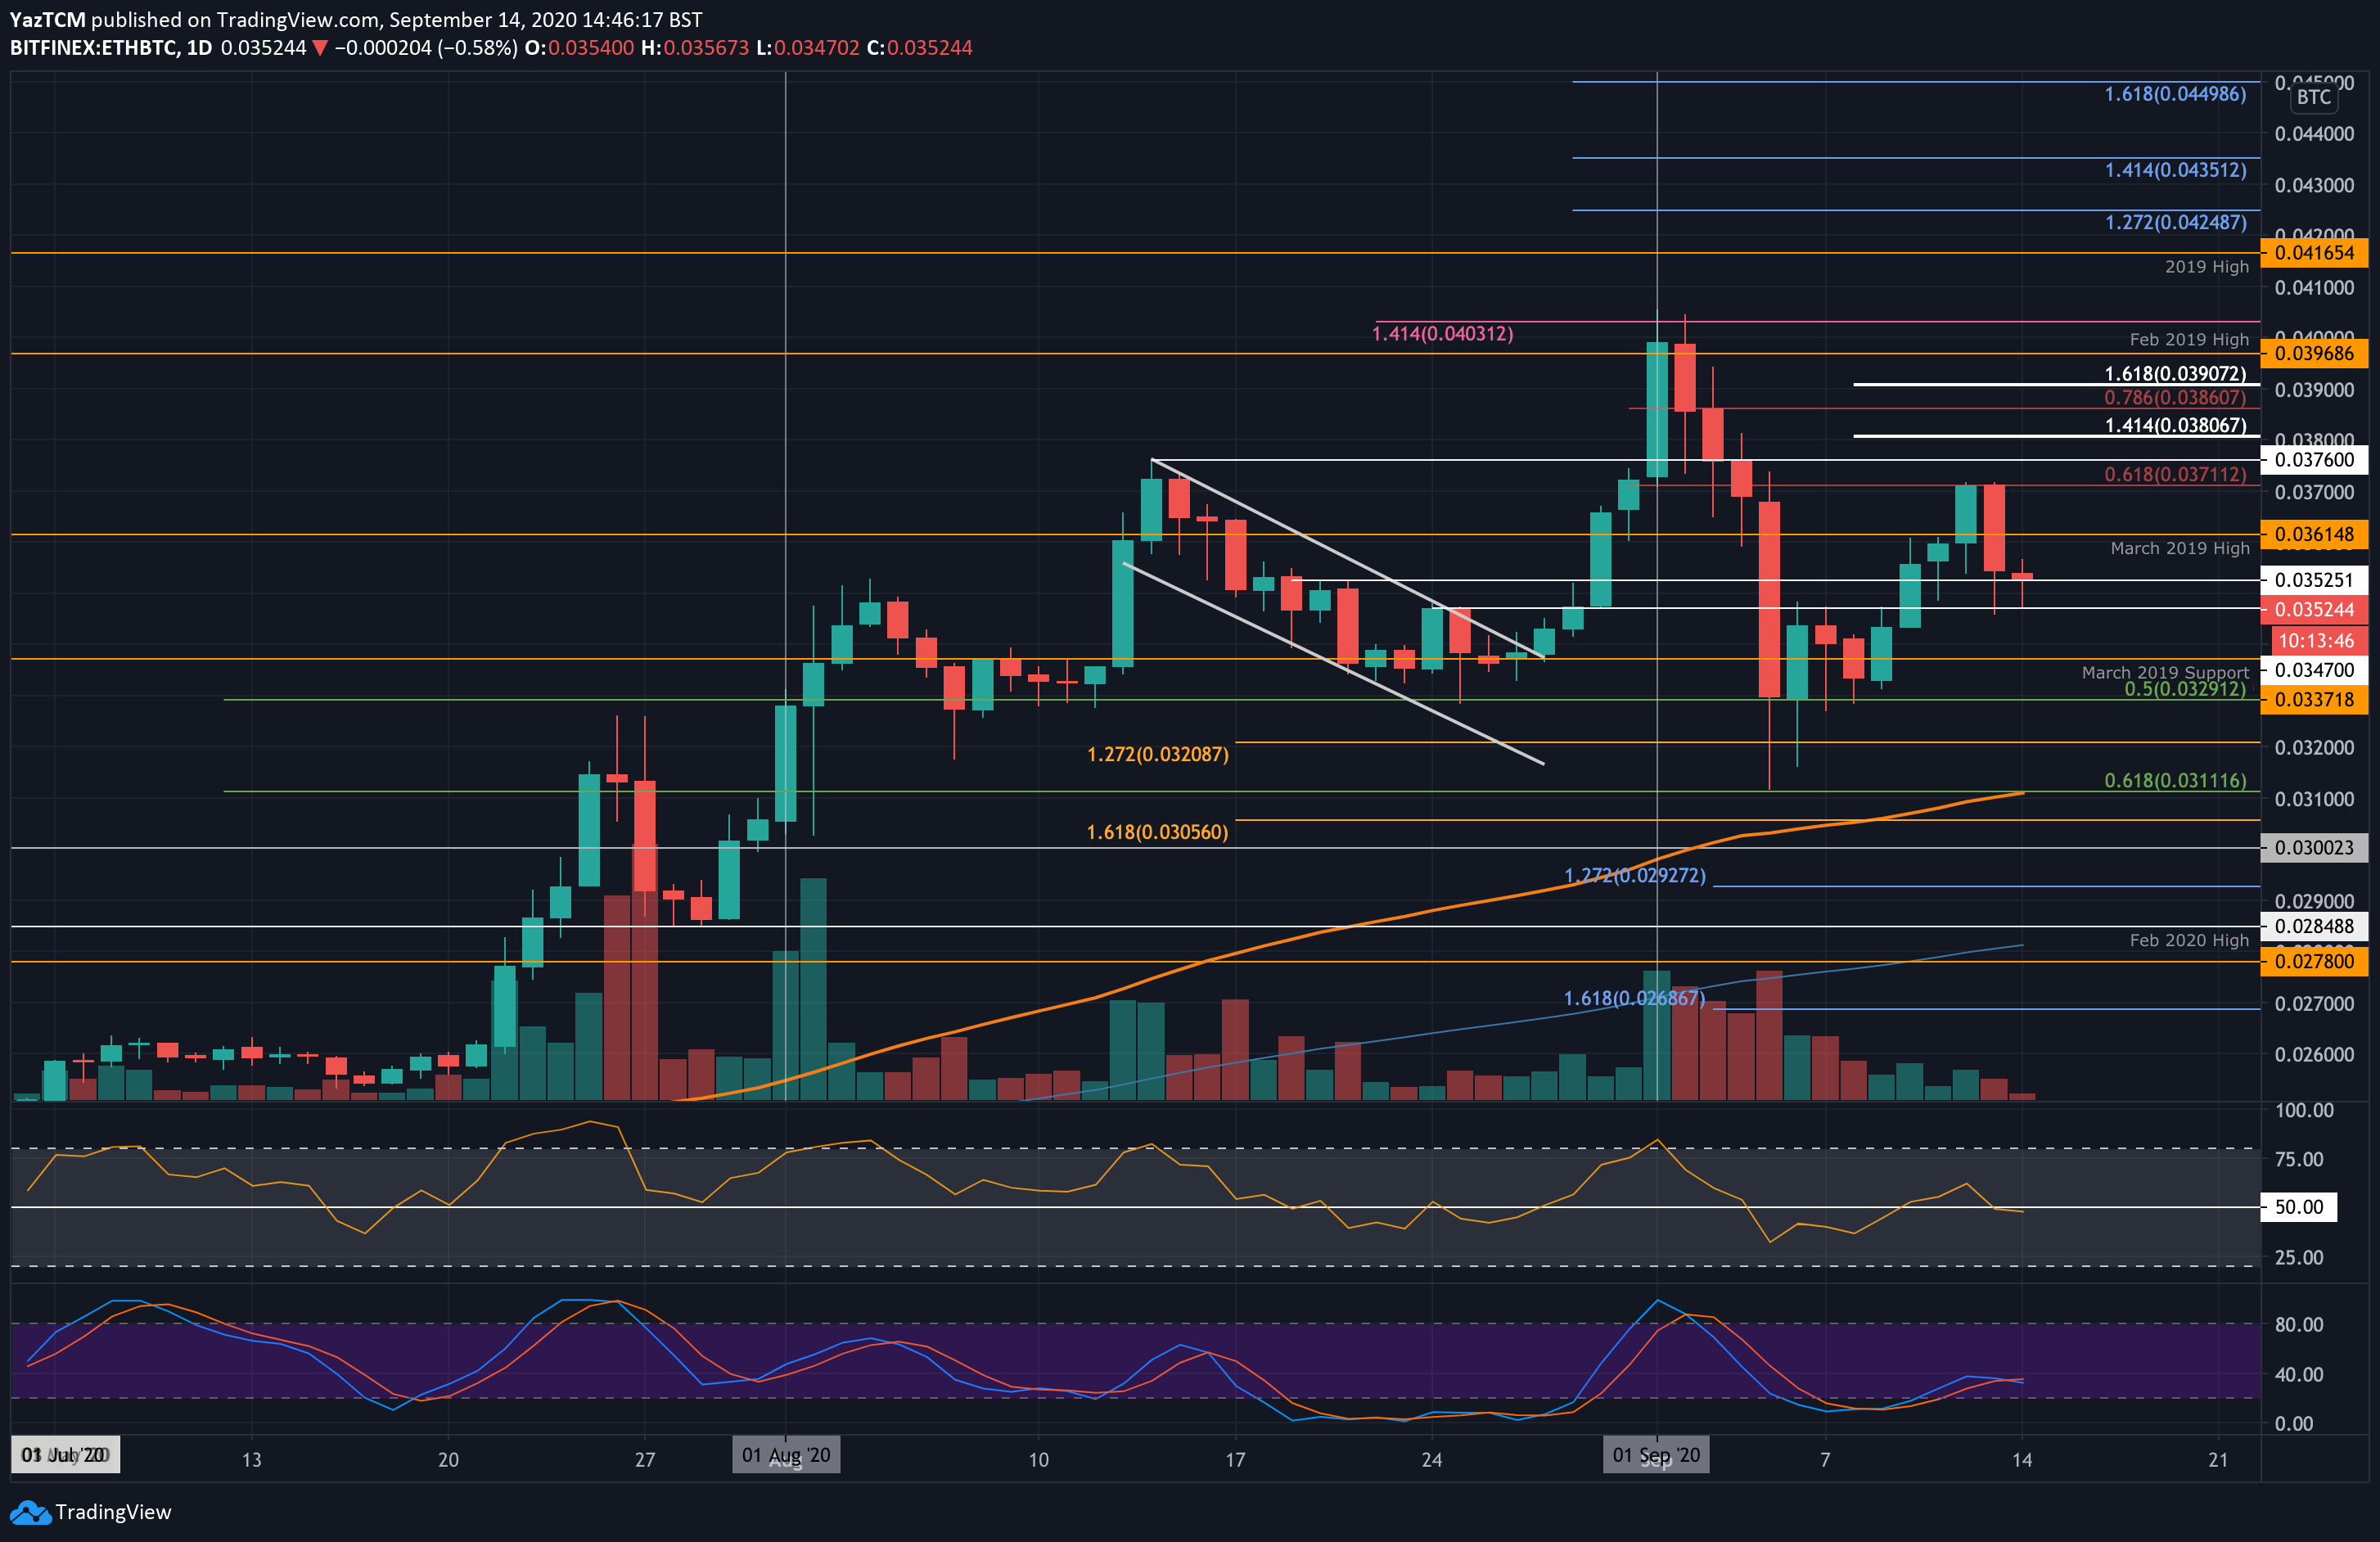 ETH Rebounds 7% From Yesterday’s Low, $400 Next? Ethereum Price Analysis